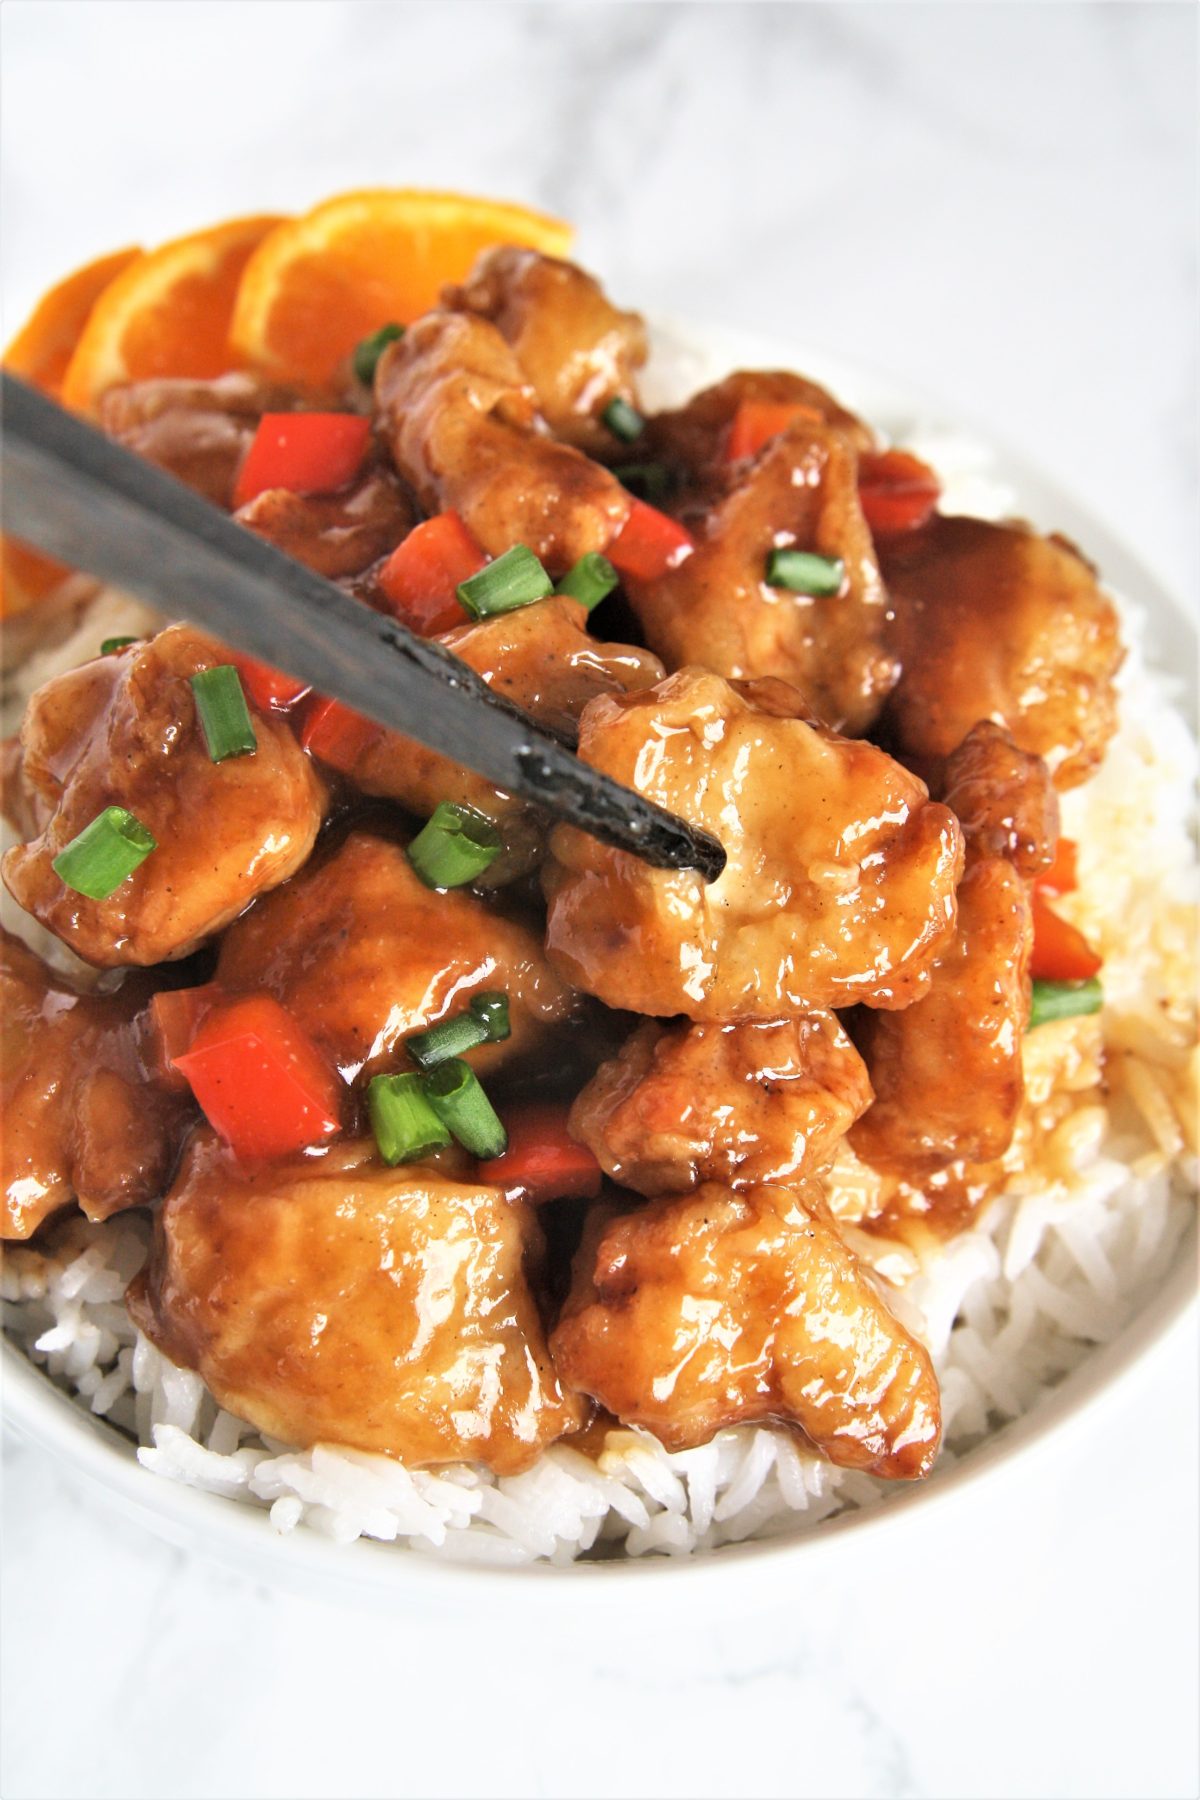 Crispy pieces of fried chicken coated in a delicious sweet and sticky orange sauce, this Panda Express Copycat Orange Chicken will become your new favorite weeknight dinner option!